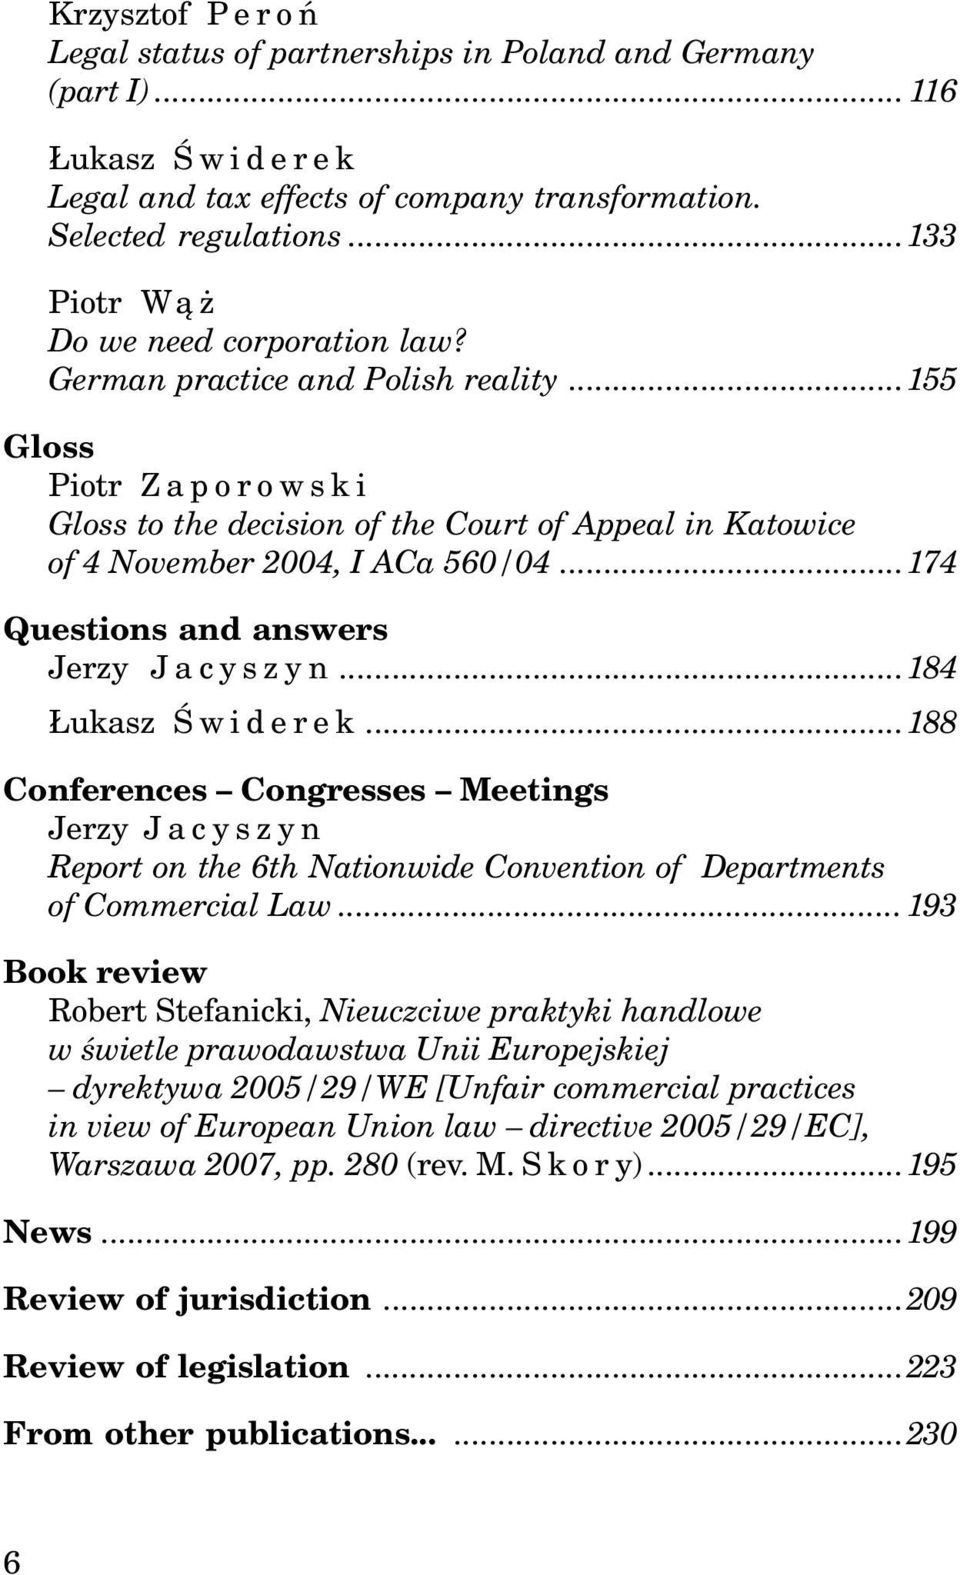 ..174 Questions and answers Jerzy Jacyszyn...184 ukasz Œwiderek...188 Conferences Congresses Meetings Jerzy Jacyszyn Report on the 6th Nationwide Convention of Departments of Commercial Law.